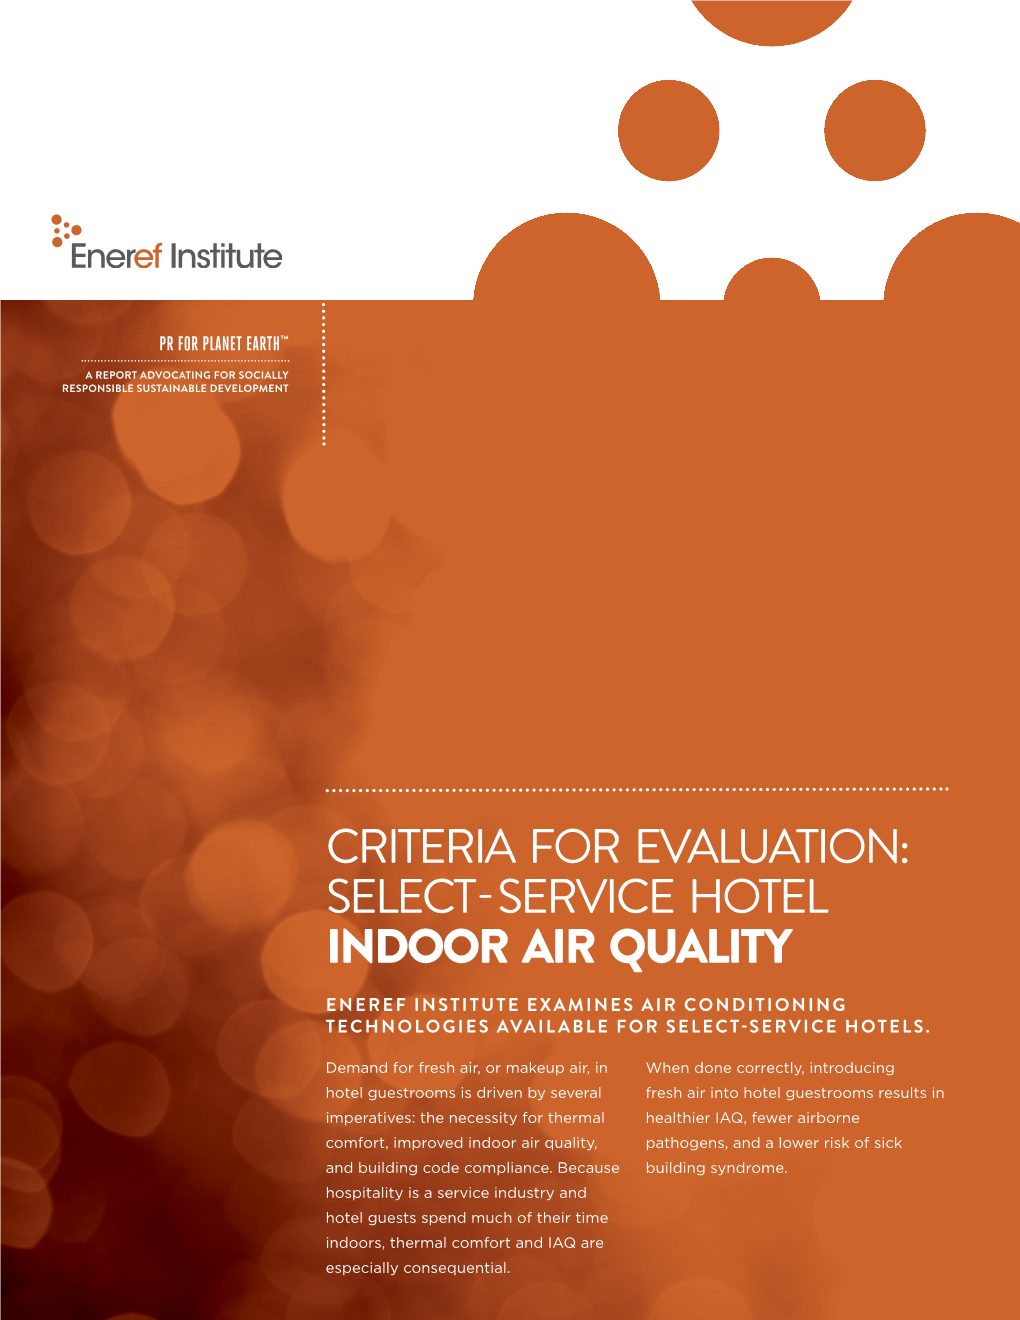 Select-Service Hotel Indoor Air Quality Eneref Institute Examines Air Conditioning Technologies Available for Select-Service Hotels